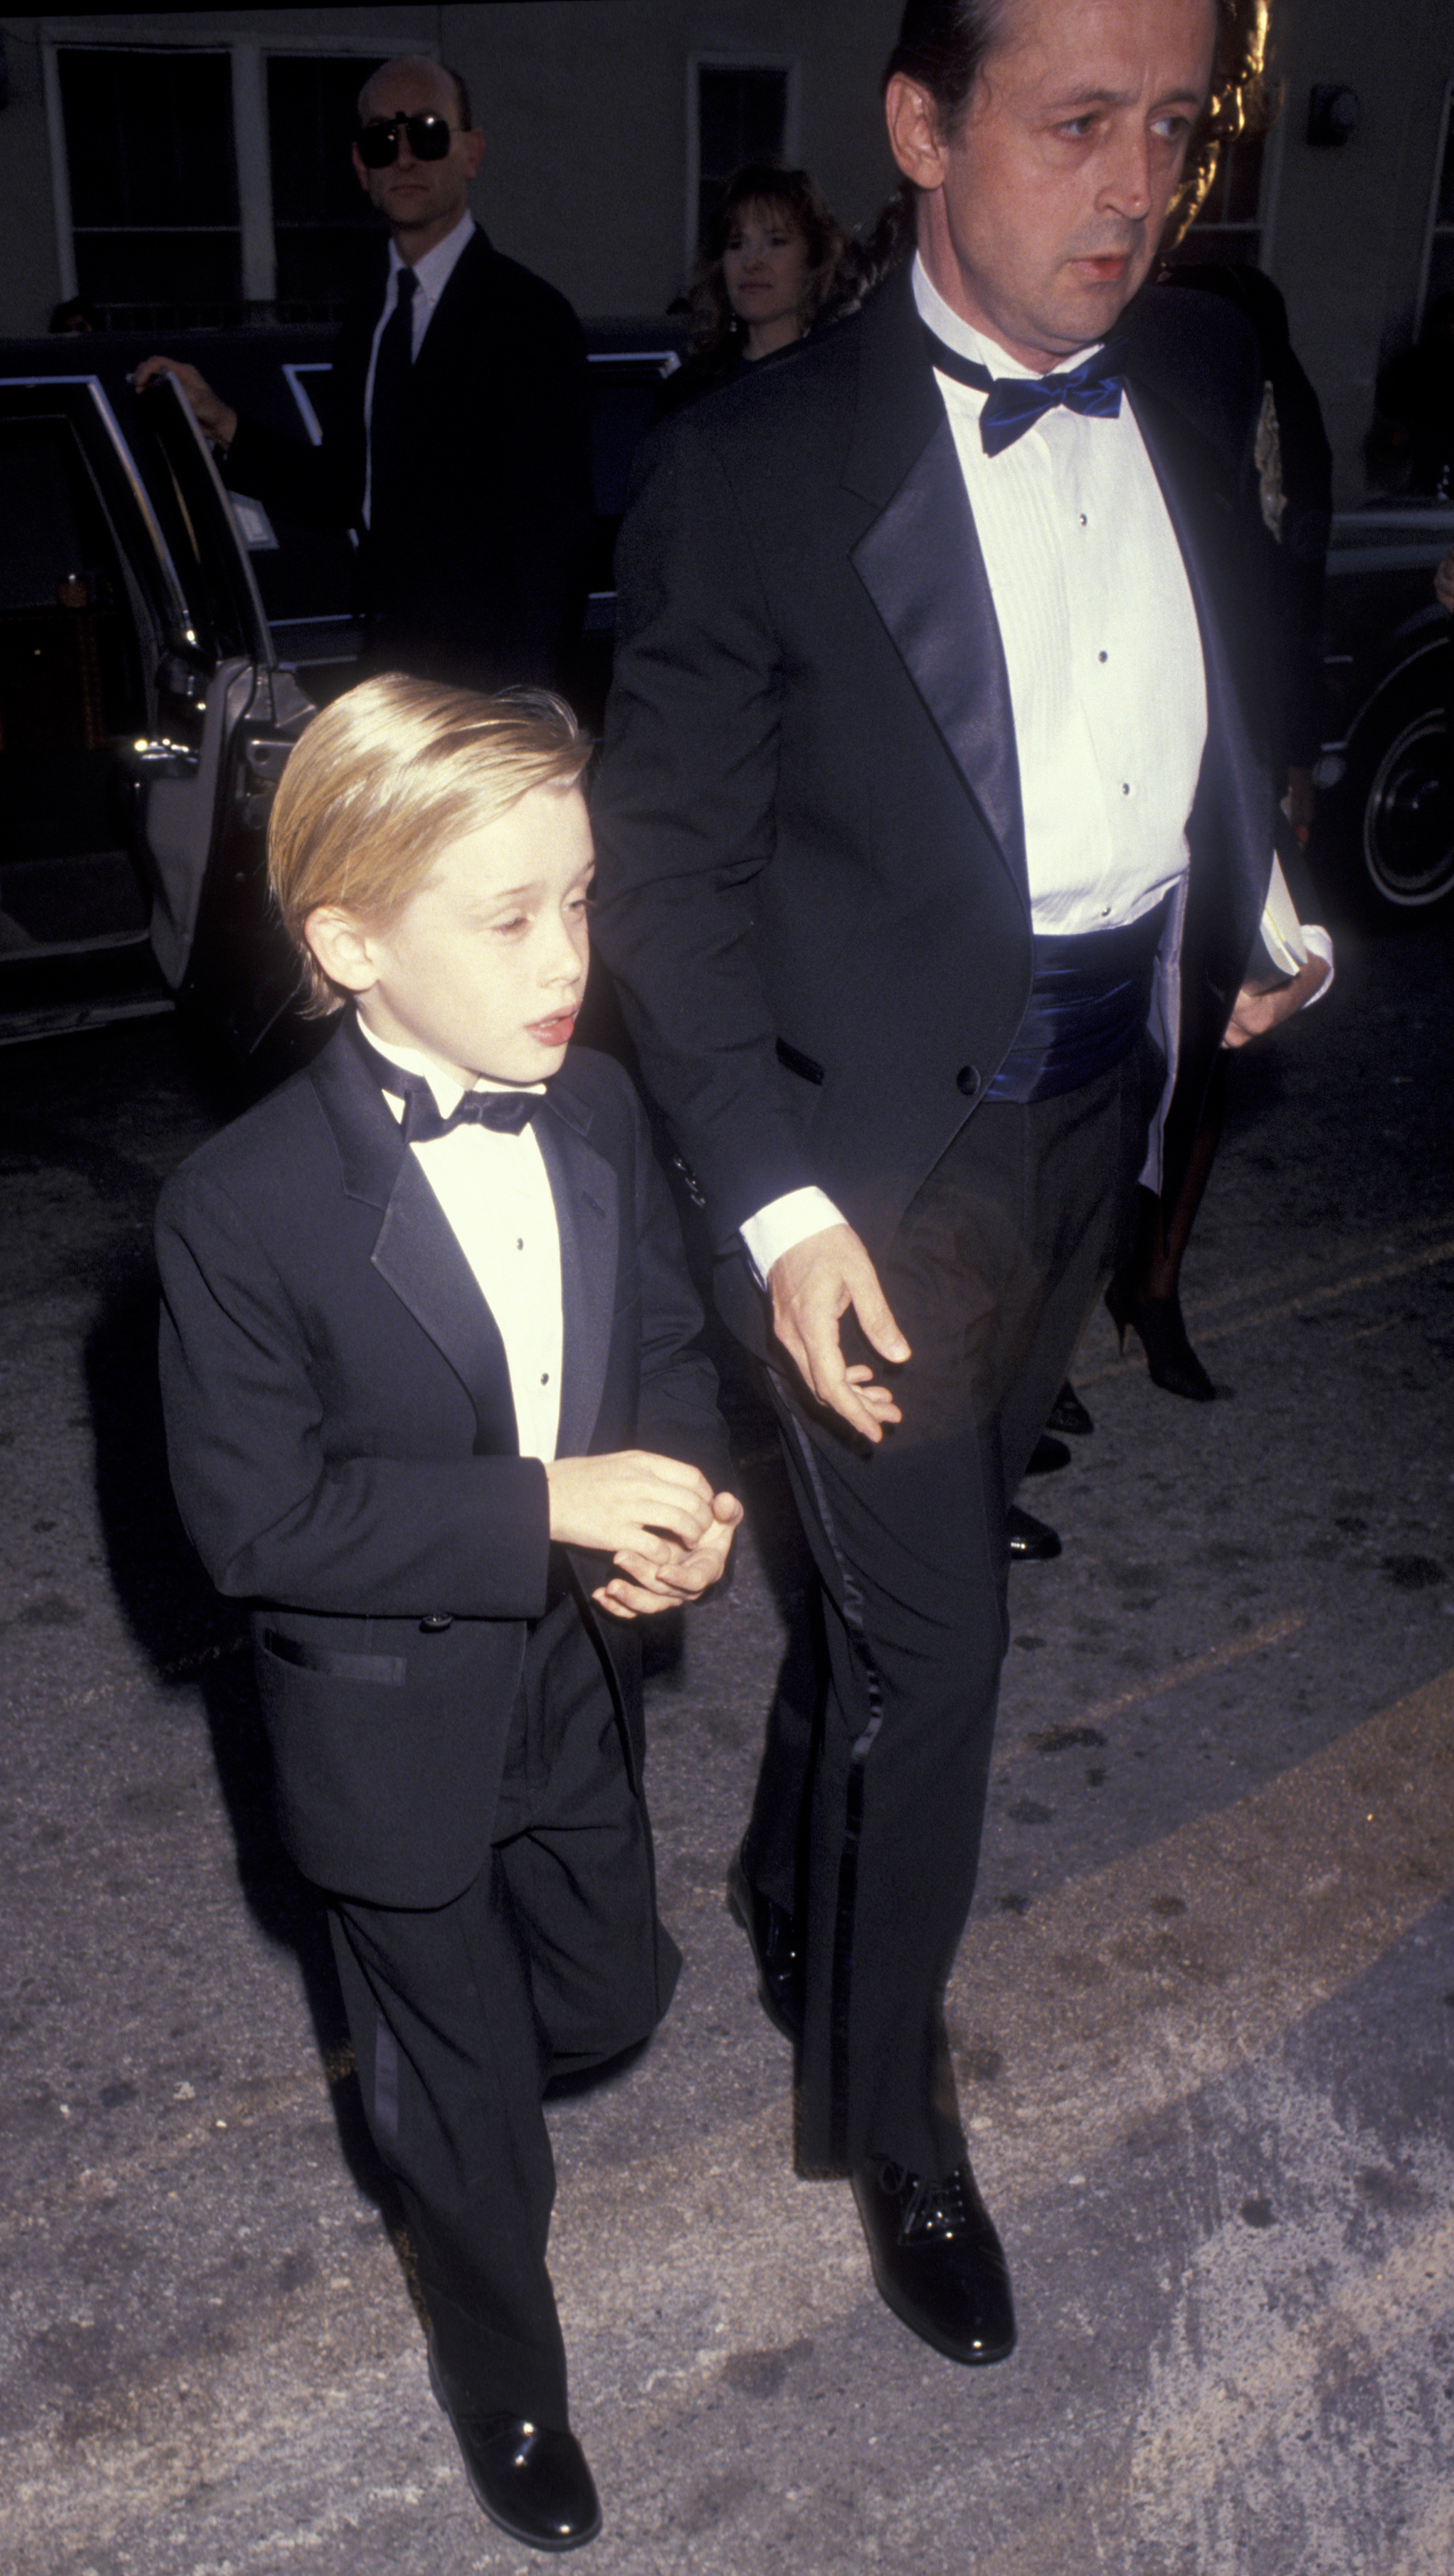 Macaulay Culkin and his father Kit in Hollywood in 1993 |  Source: Getty Images